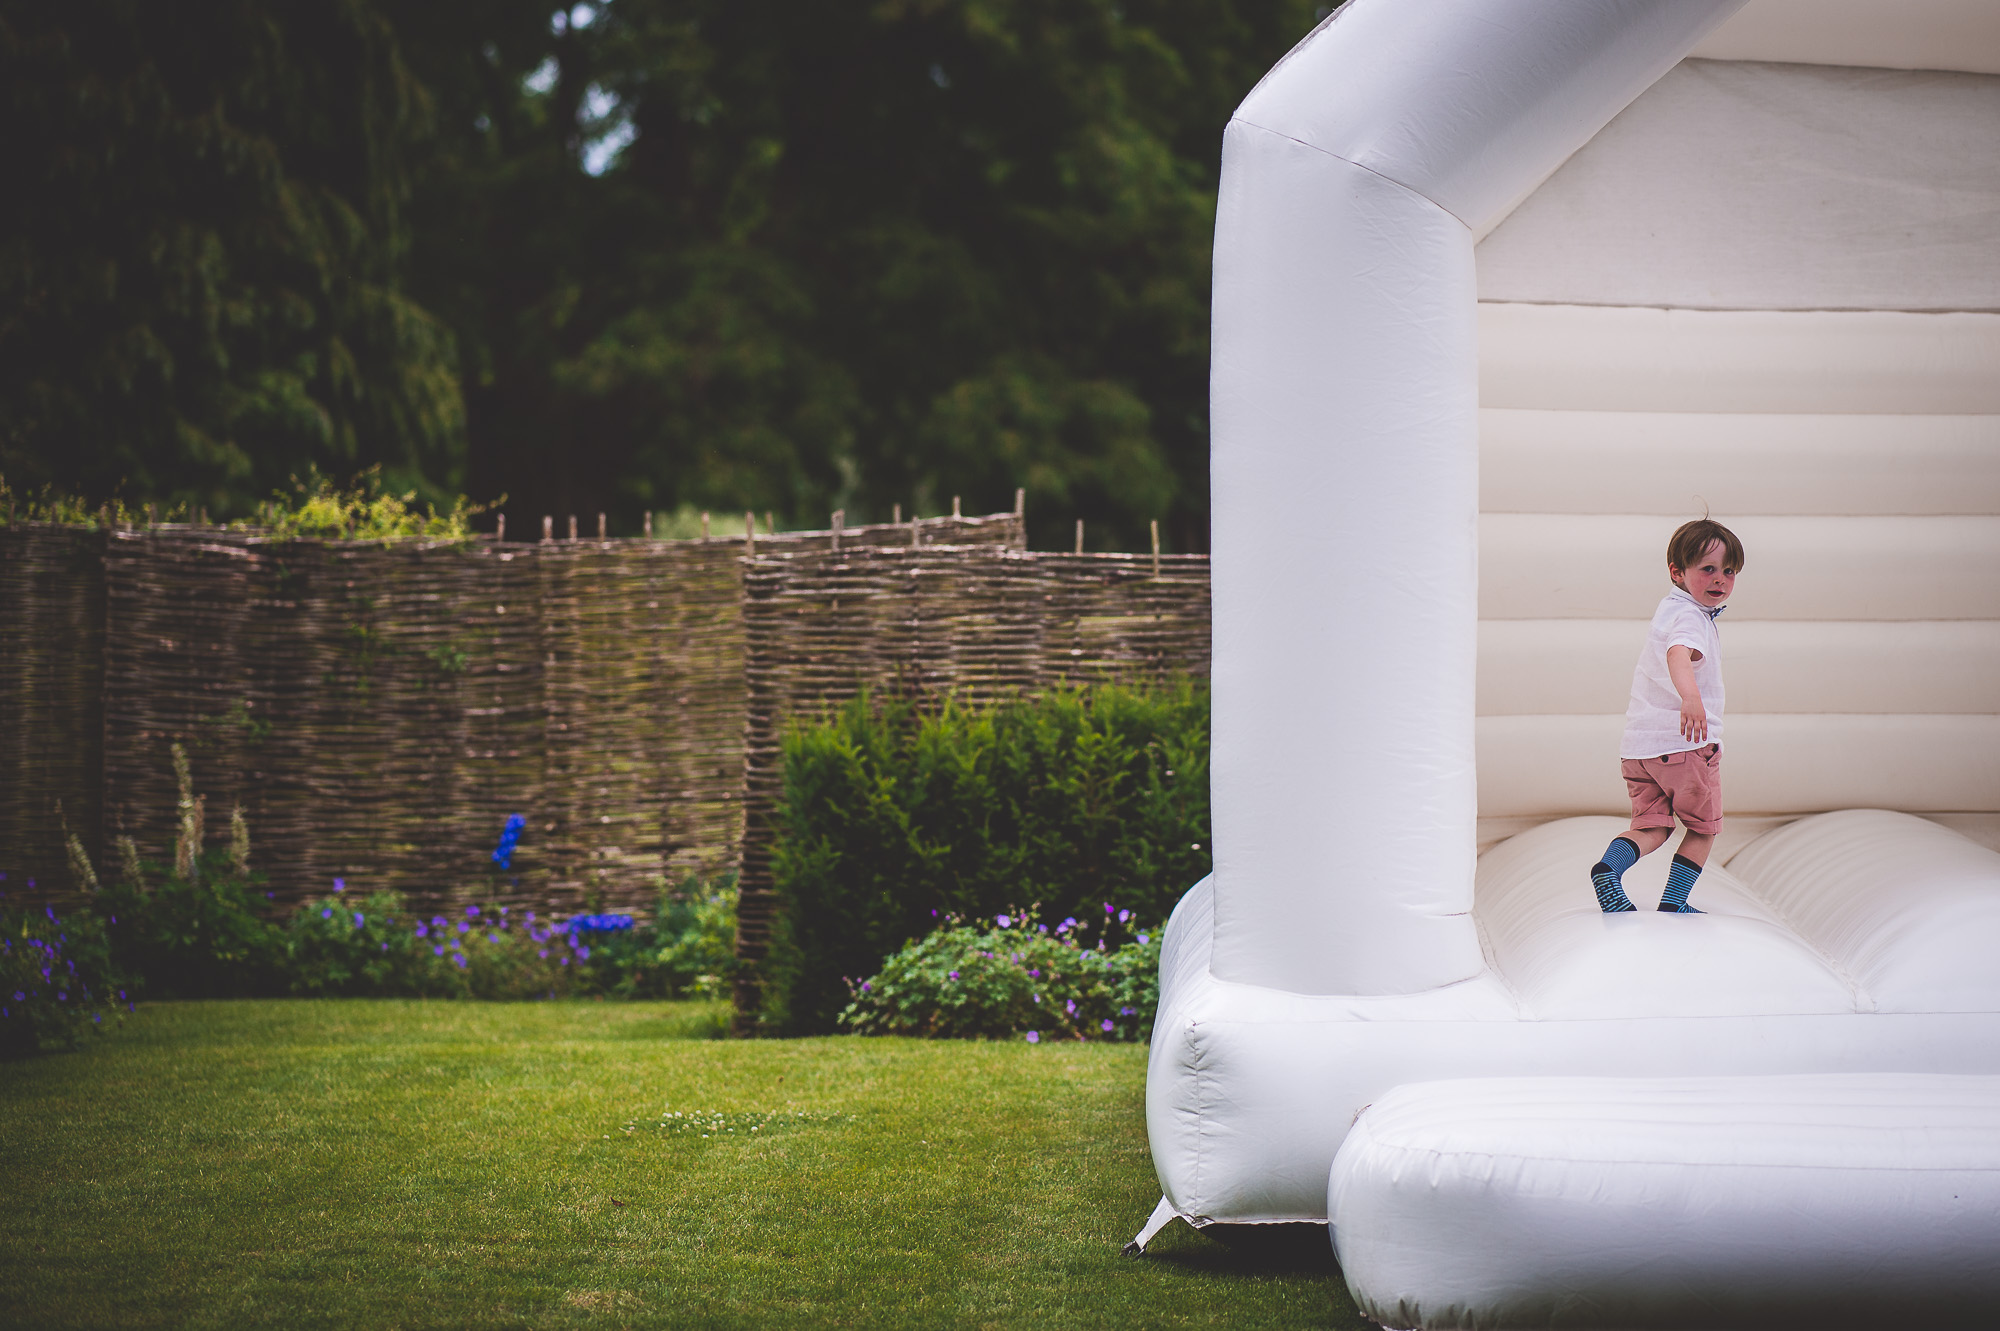 A child dressed as a groom poses on top of an inflatable bouncer in a garden for a wedding photographer's photo.